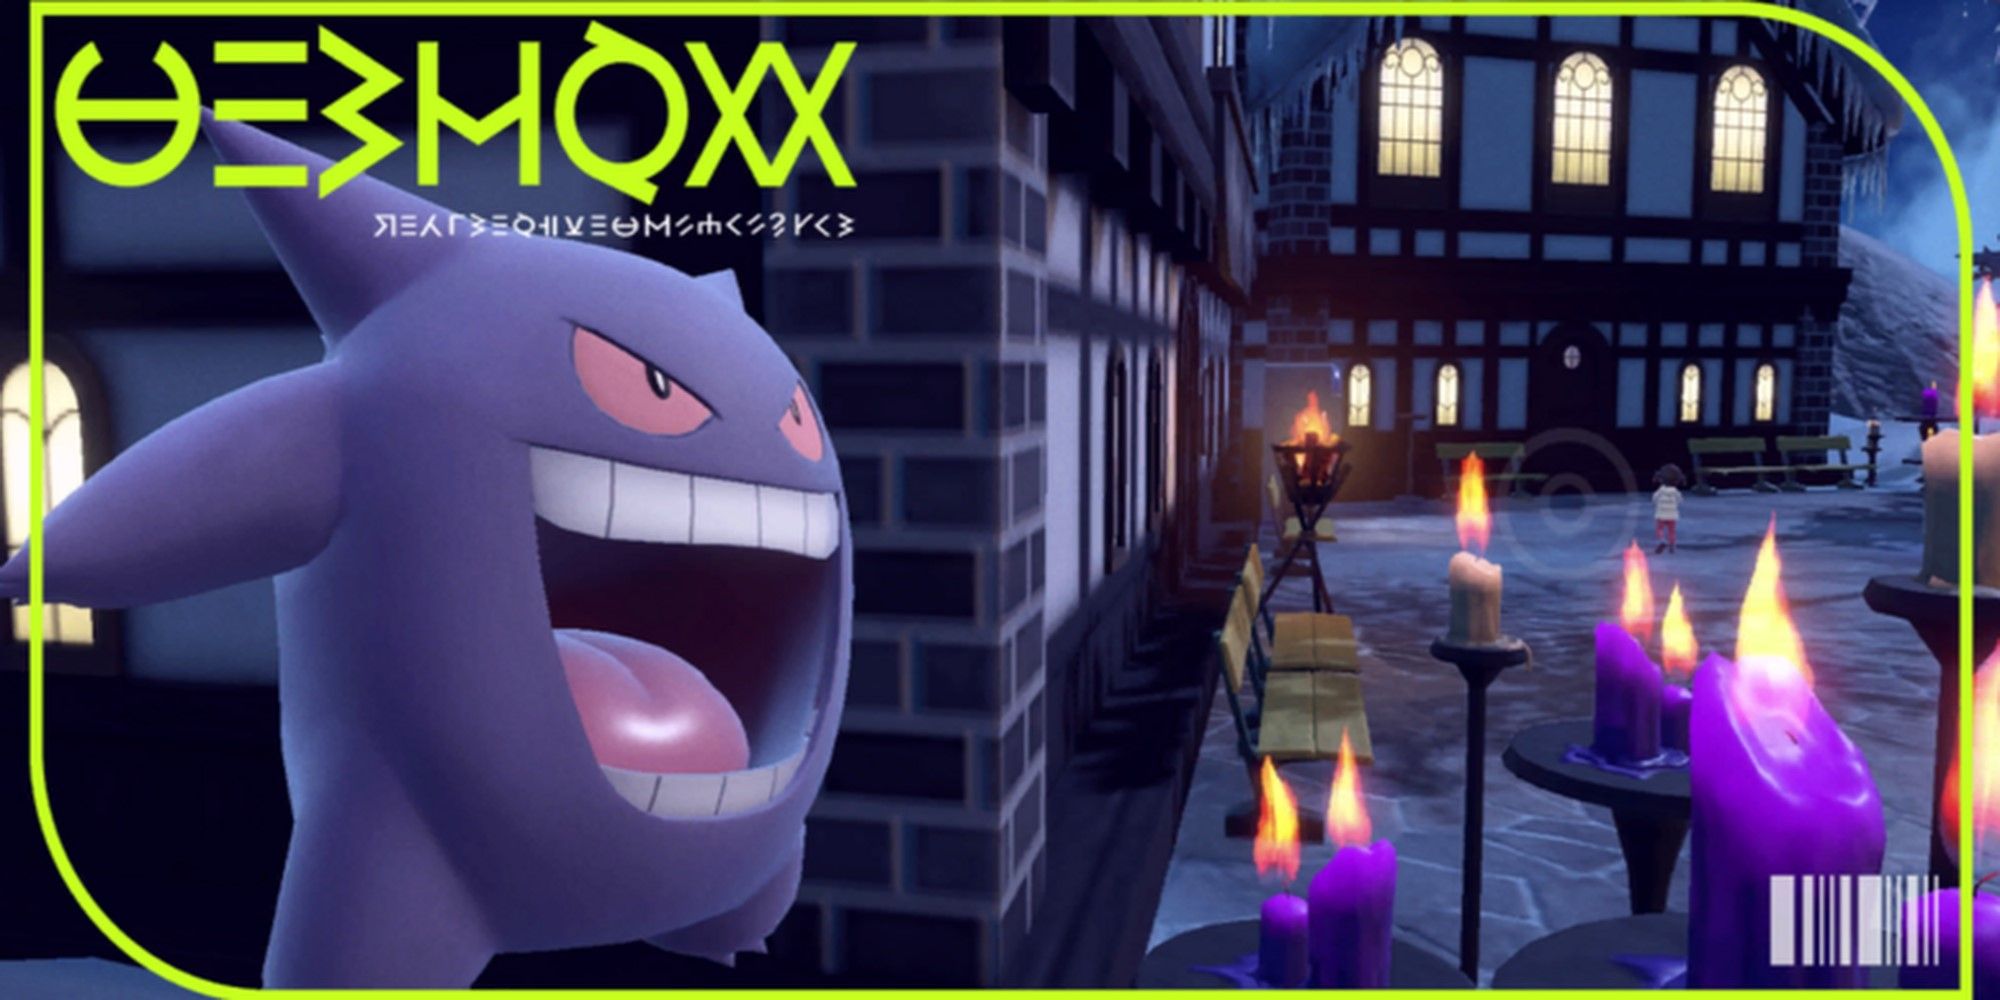 The cover image for Gengar's dex entry in paldea